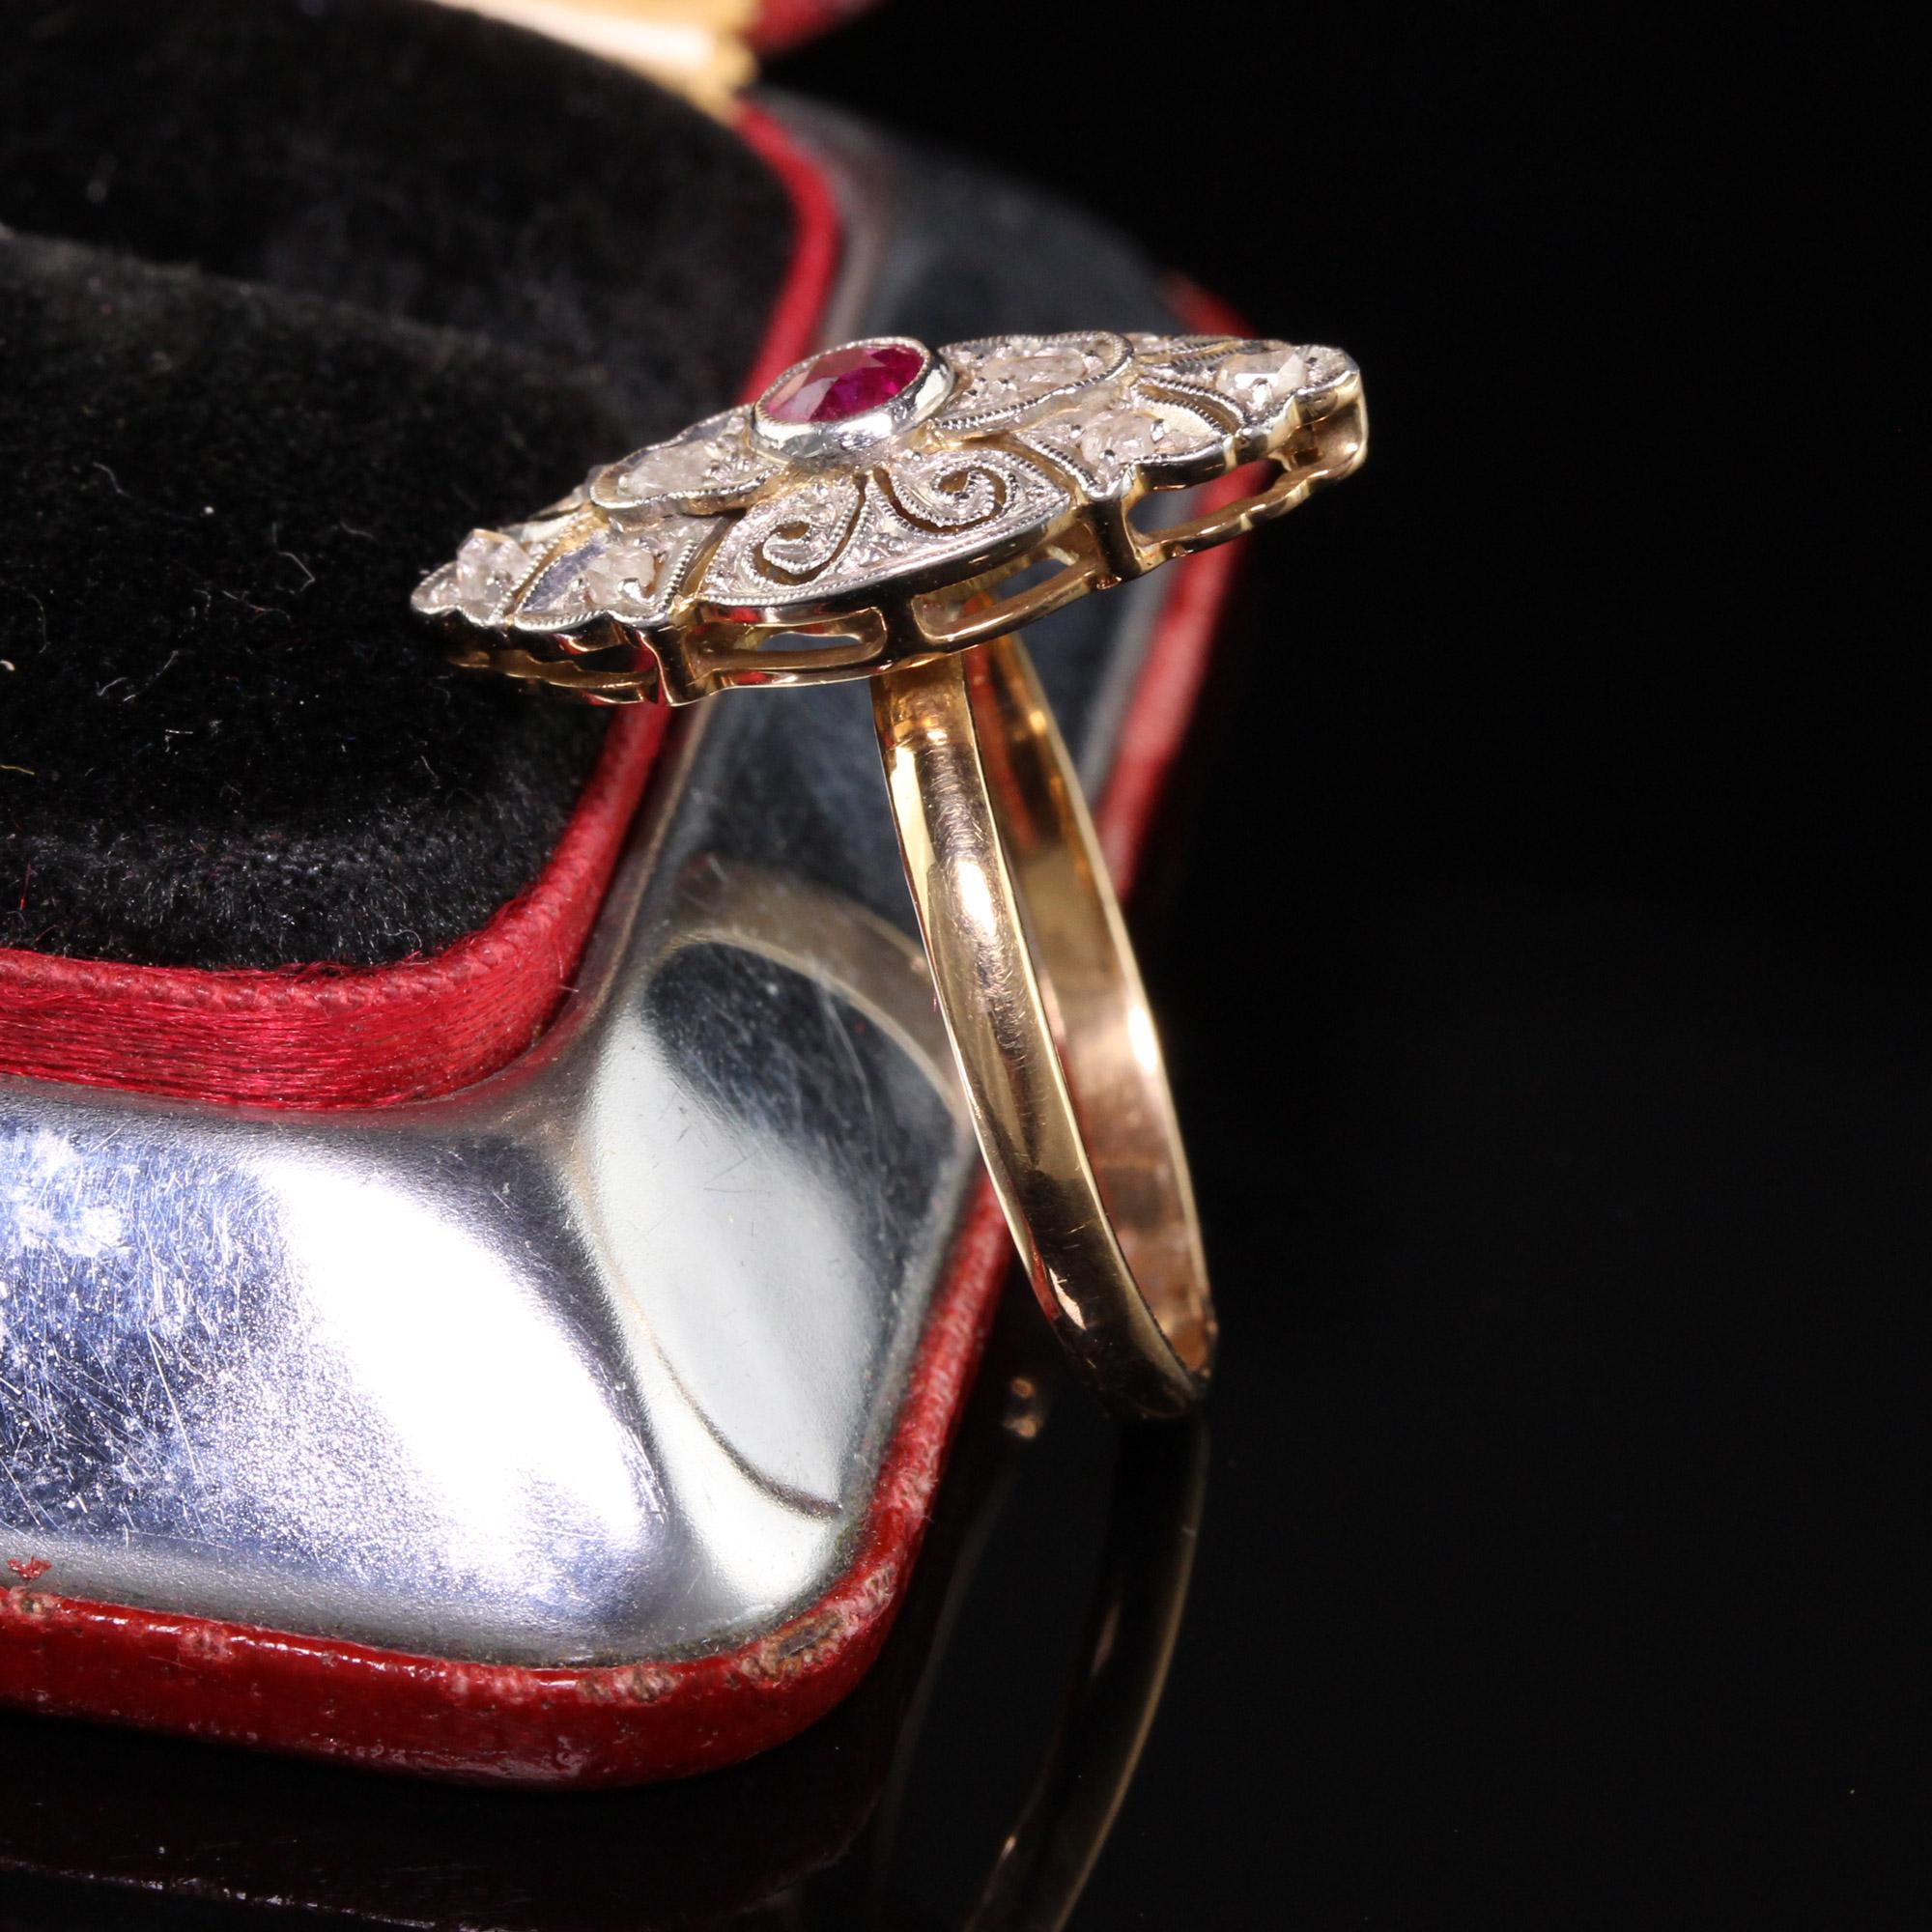 Gorgeous Antique Victorian 18K Yellow Gold Platinum Top Rose Cut Diamond and Ruby Ring. This ring has a beautiful look and has a low profile on the finger.

Item #R0773

Metal: 18K Yellow Gold and Platinum

Weight: 3.3 Grams

Total Diamond Weight: